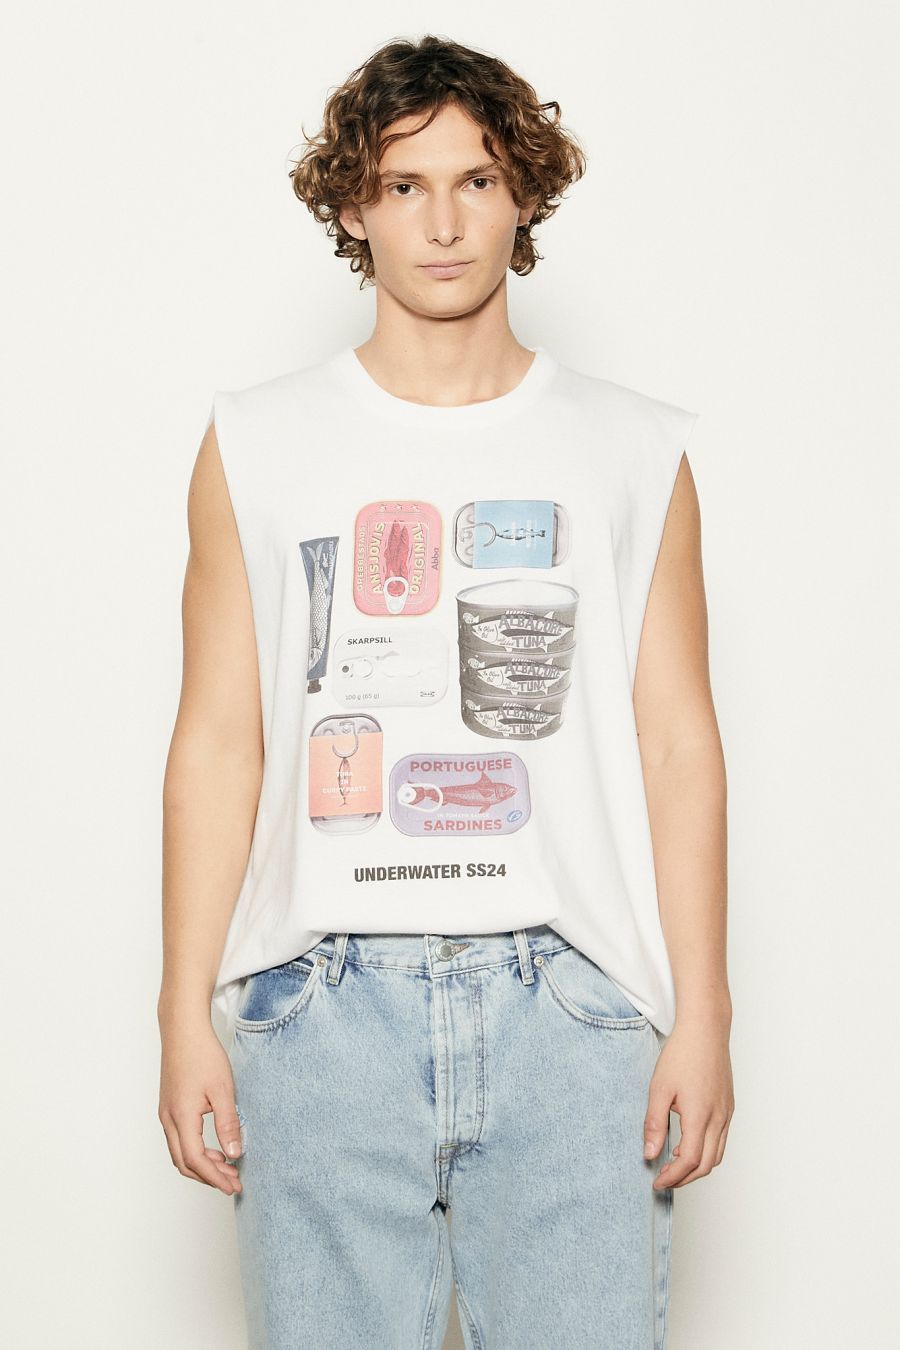 MUSCULOSA CANNED